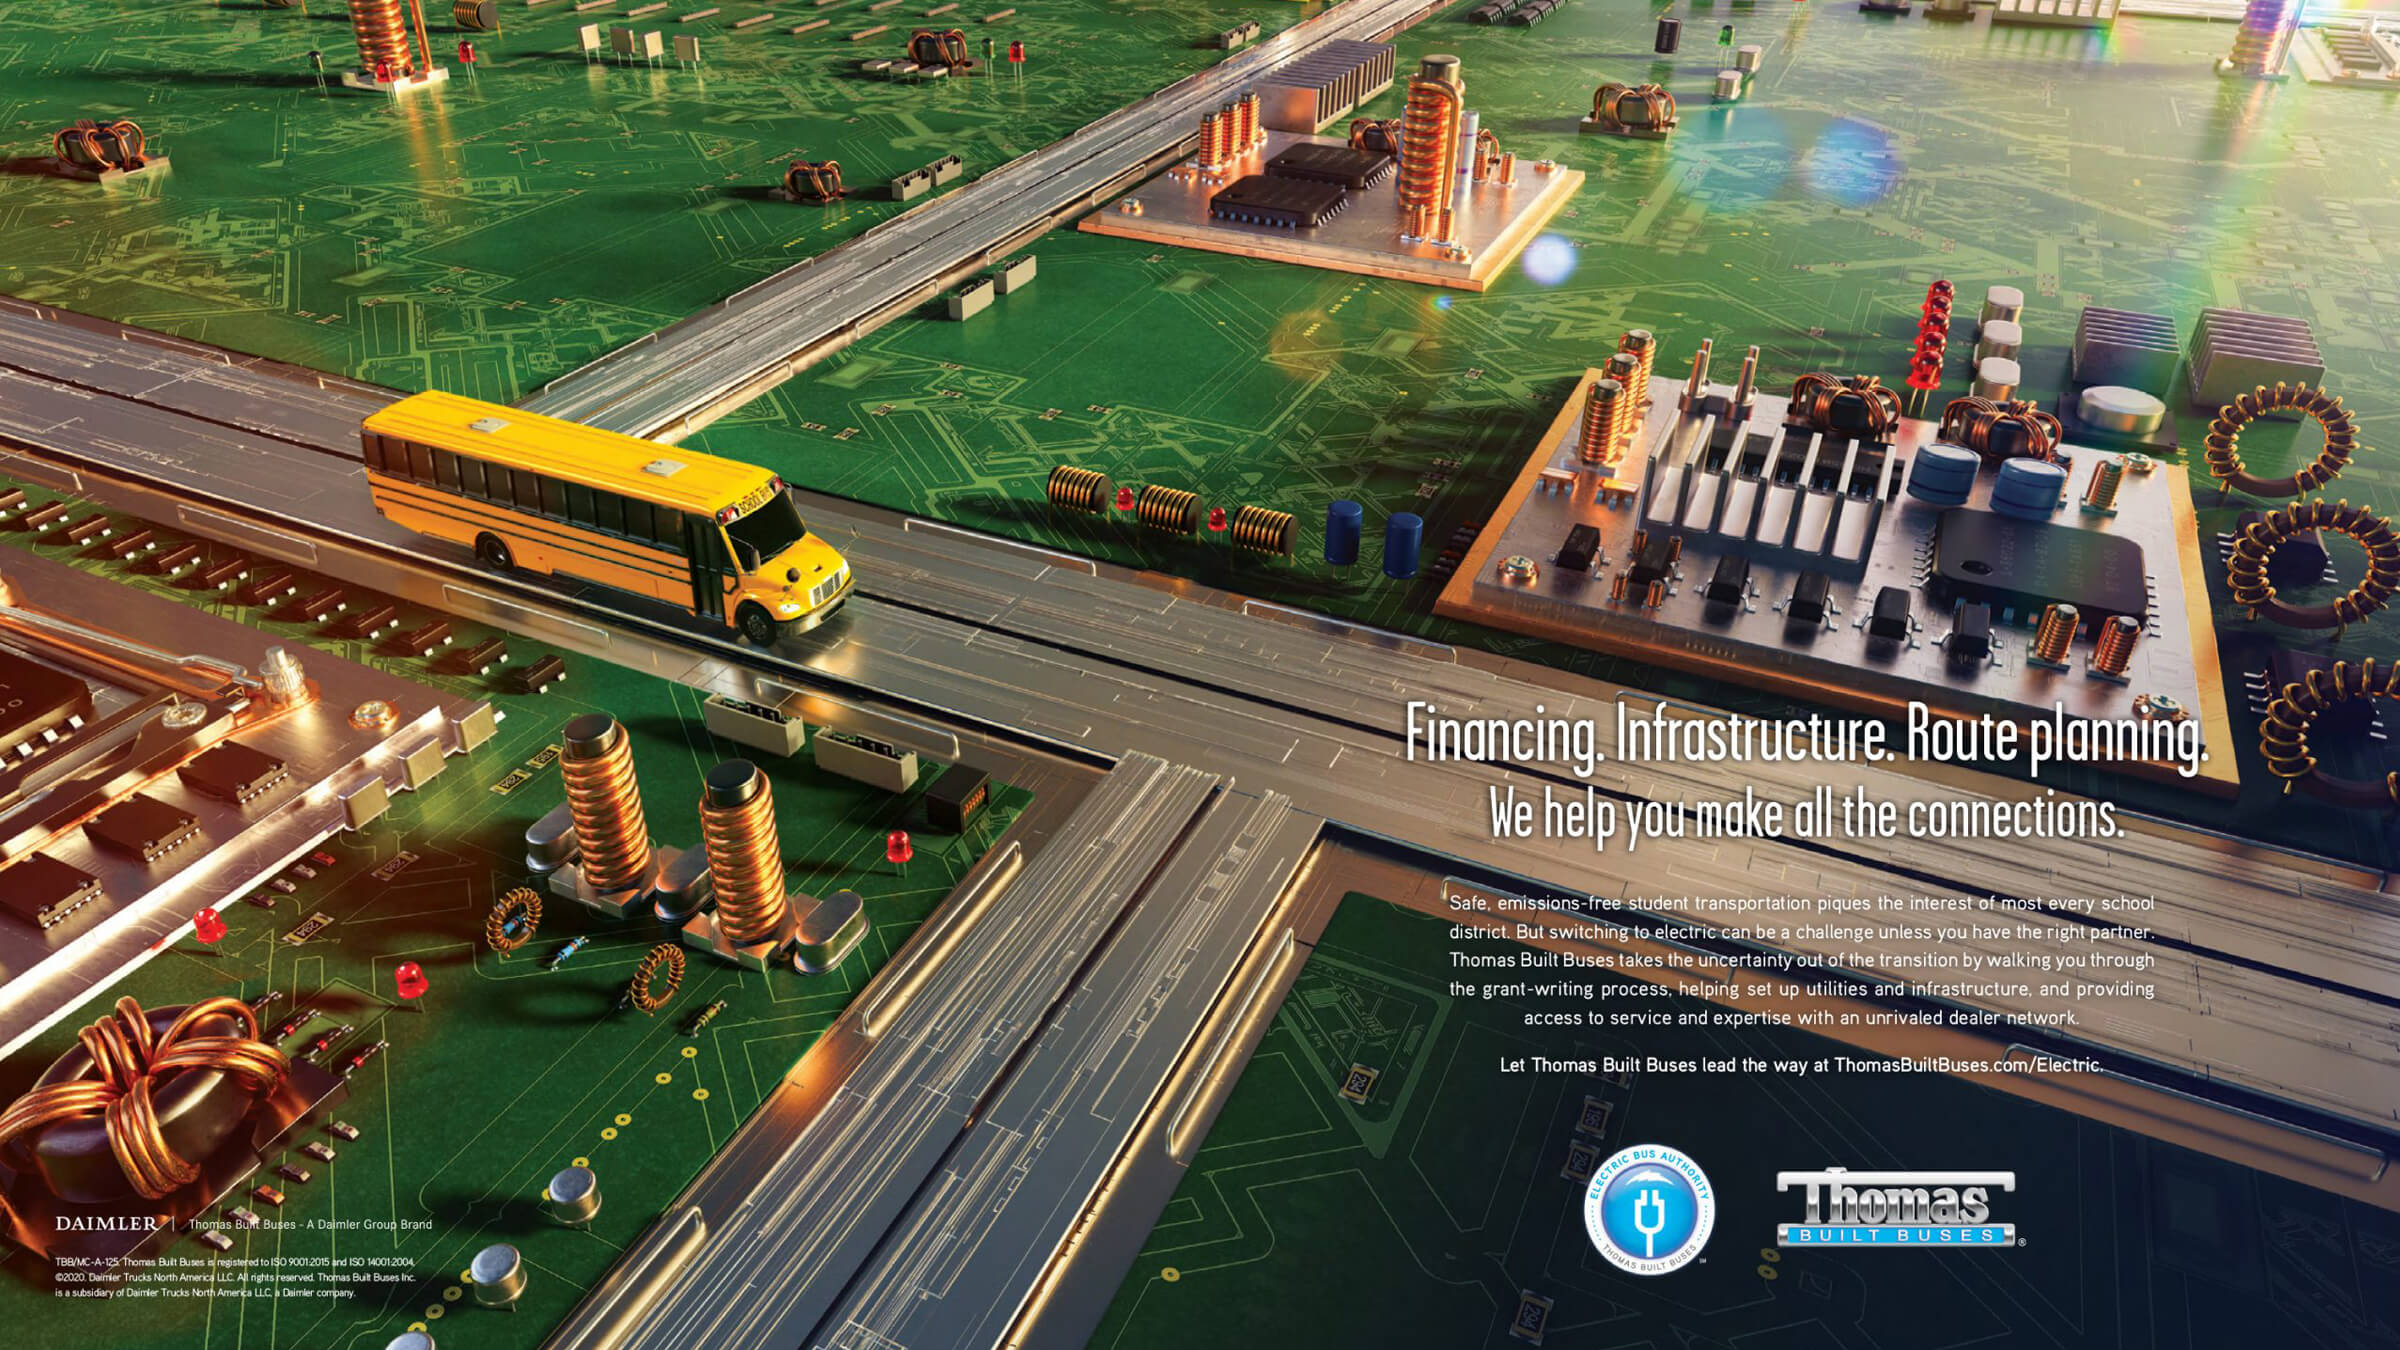 Thomas Built Buses electric vehicle campaign magazine ad